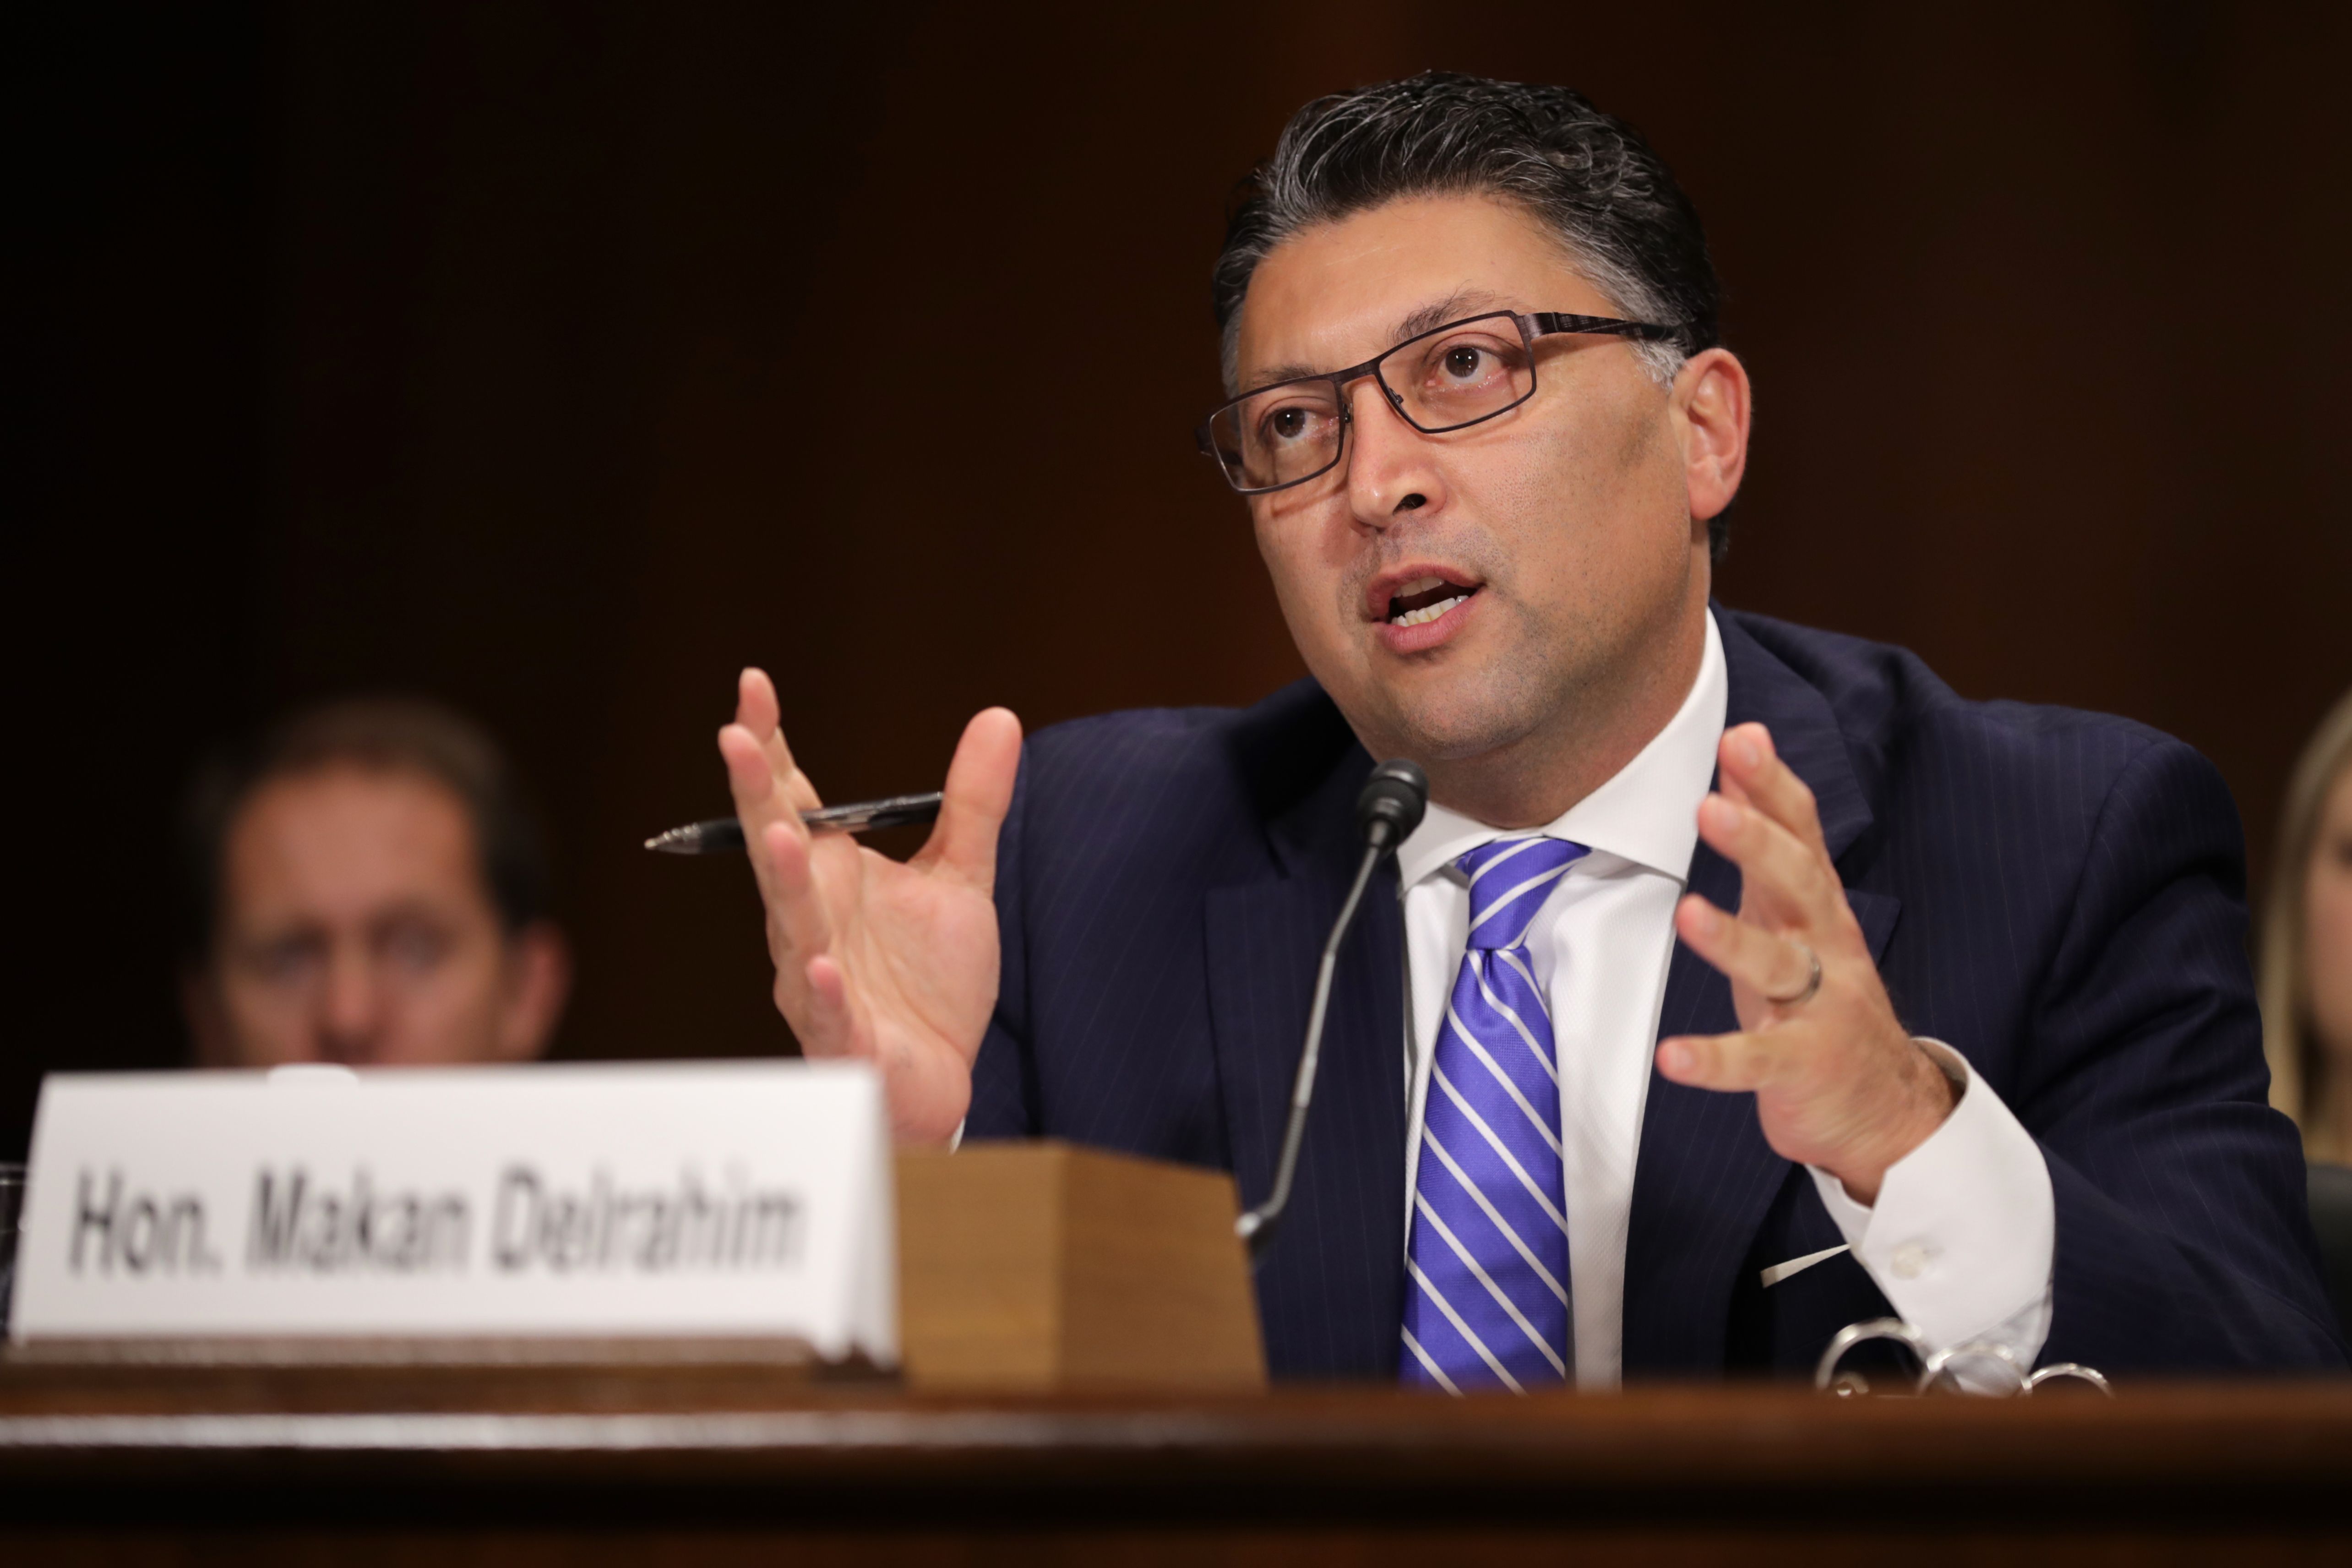 DOJ antitrust chief Makan Delrahim remains open to potential T-Mobile-Sprint deal